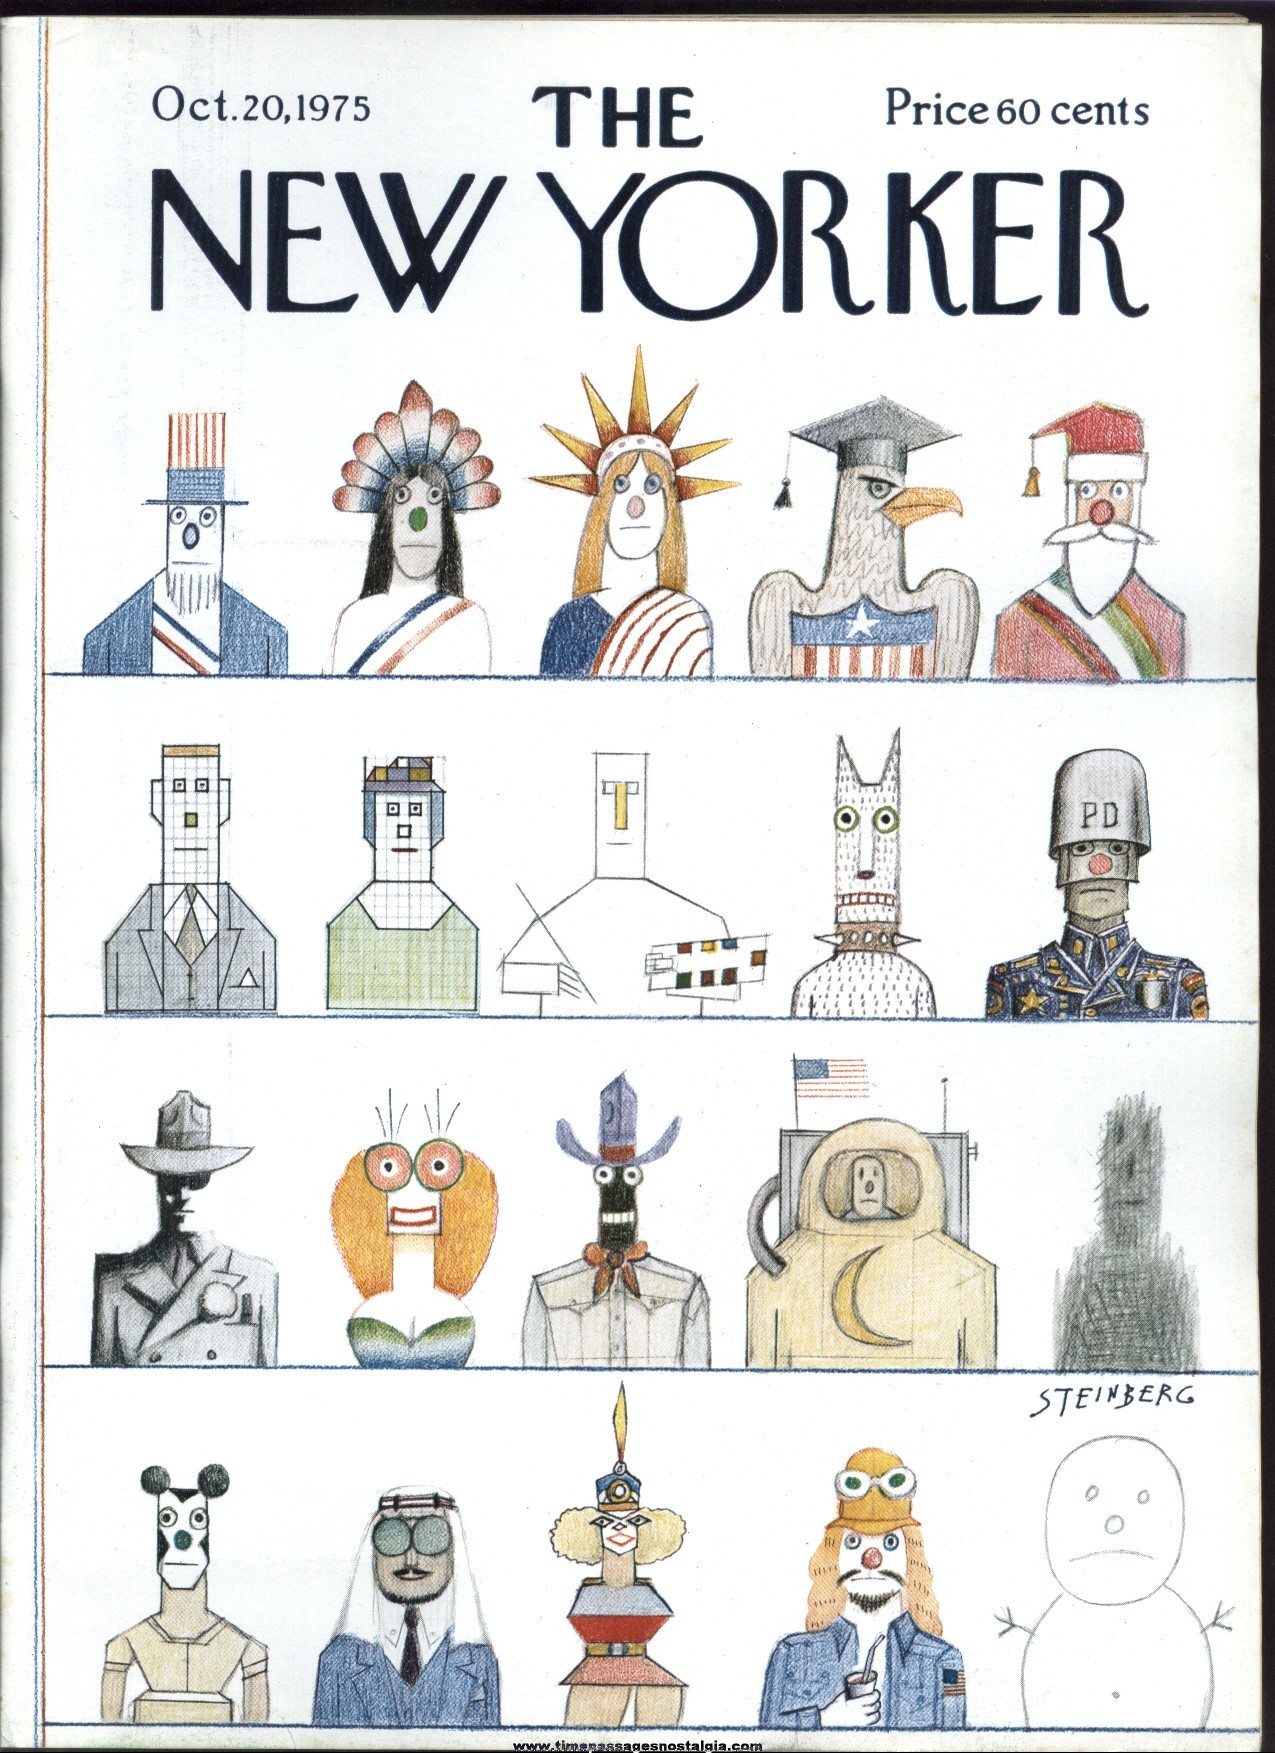 New Yorker Magazine - October 20, 1975 - Cover by Saul Steinberg